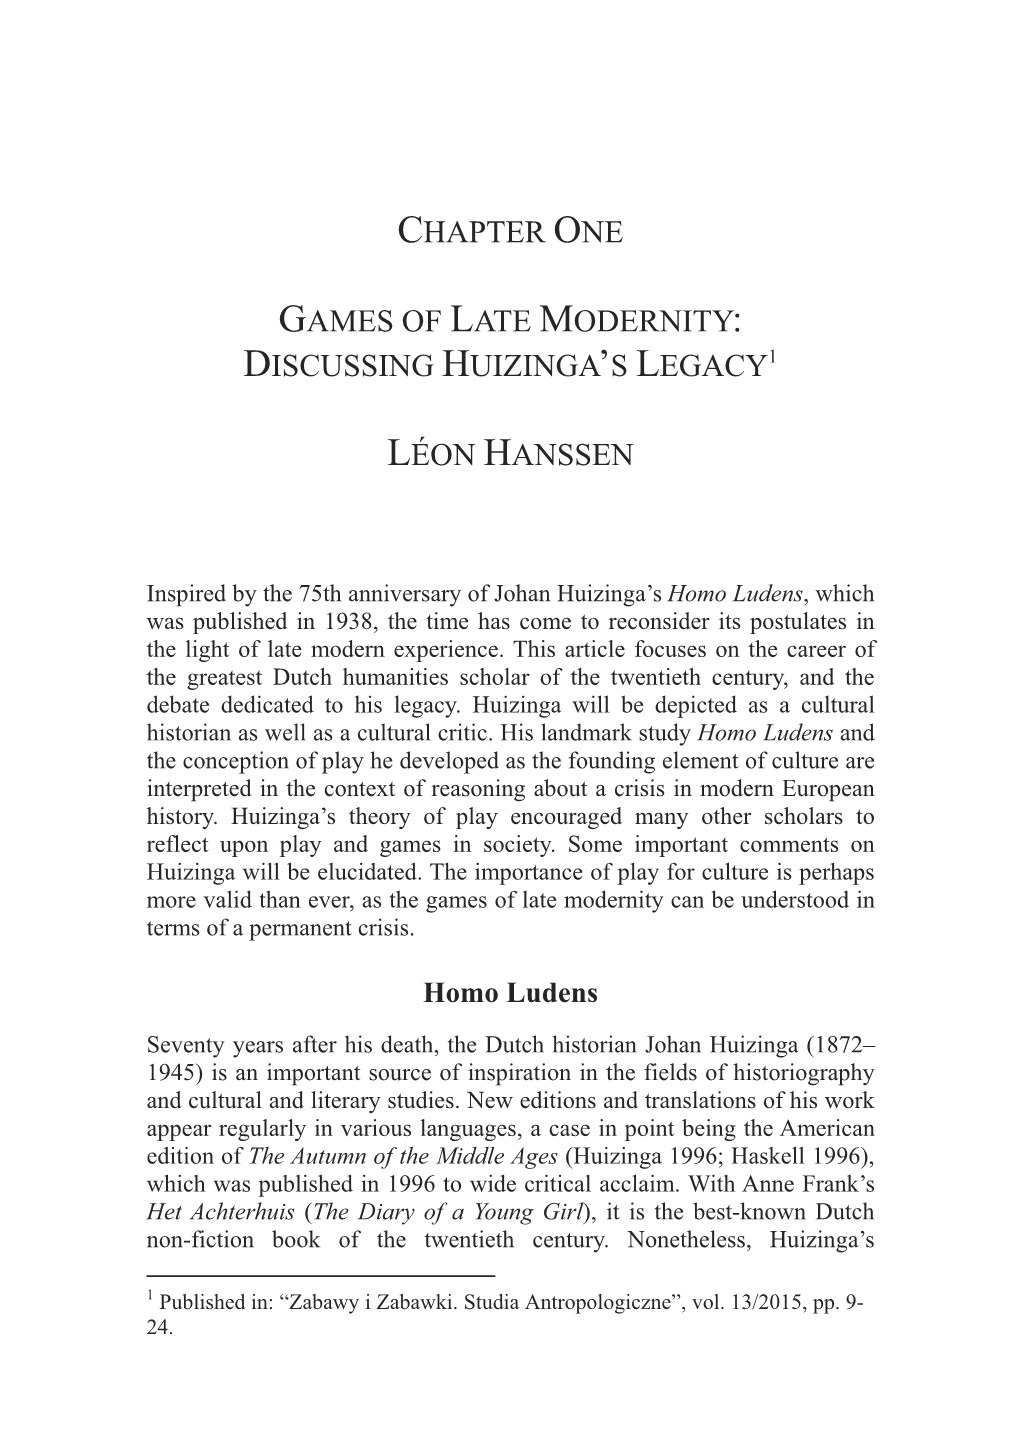 Chapter One Games of Late Modernity